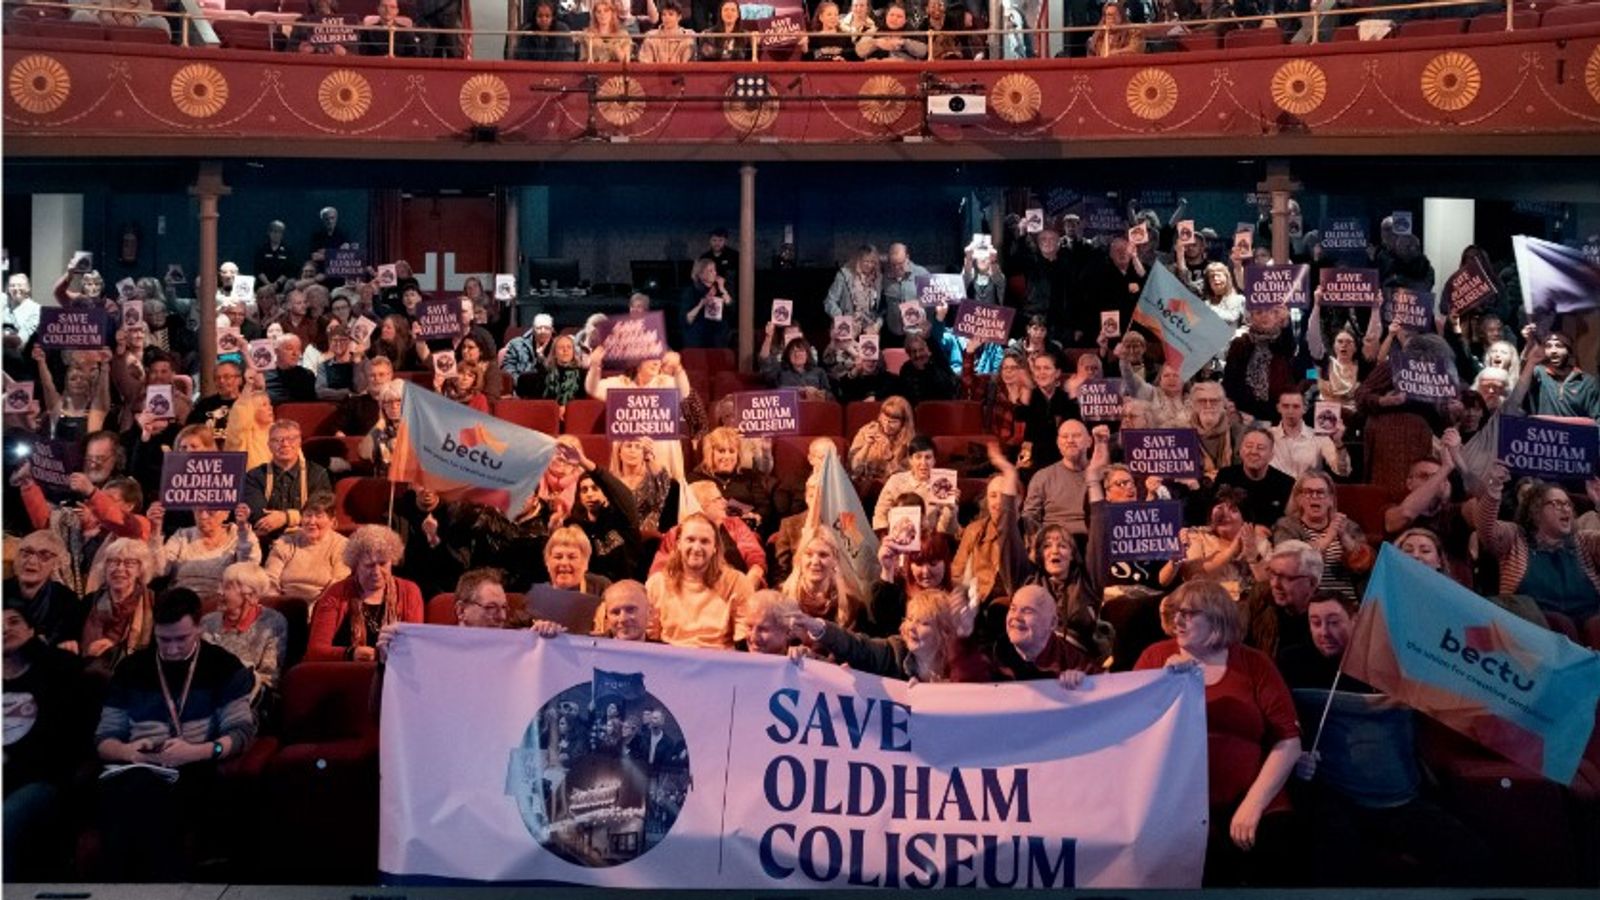 Oldham Coliseum: Campaigners including actress Maxine Peake fight to save theatre as building is said to be 'reaching natural end'